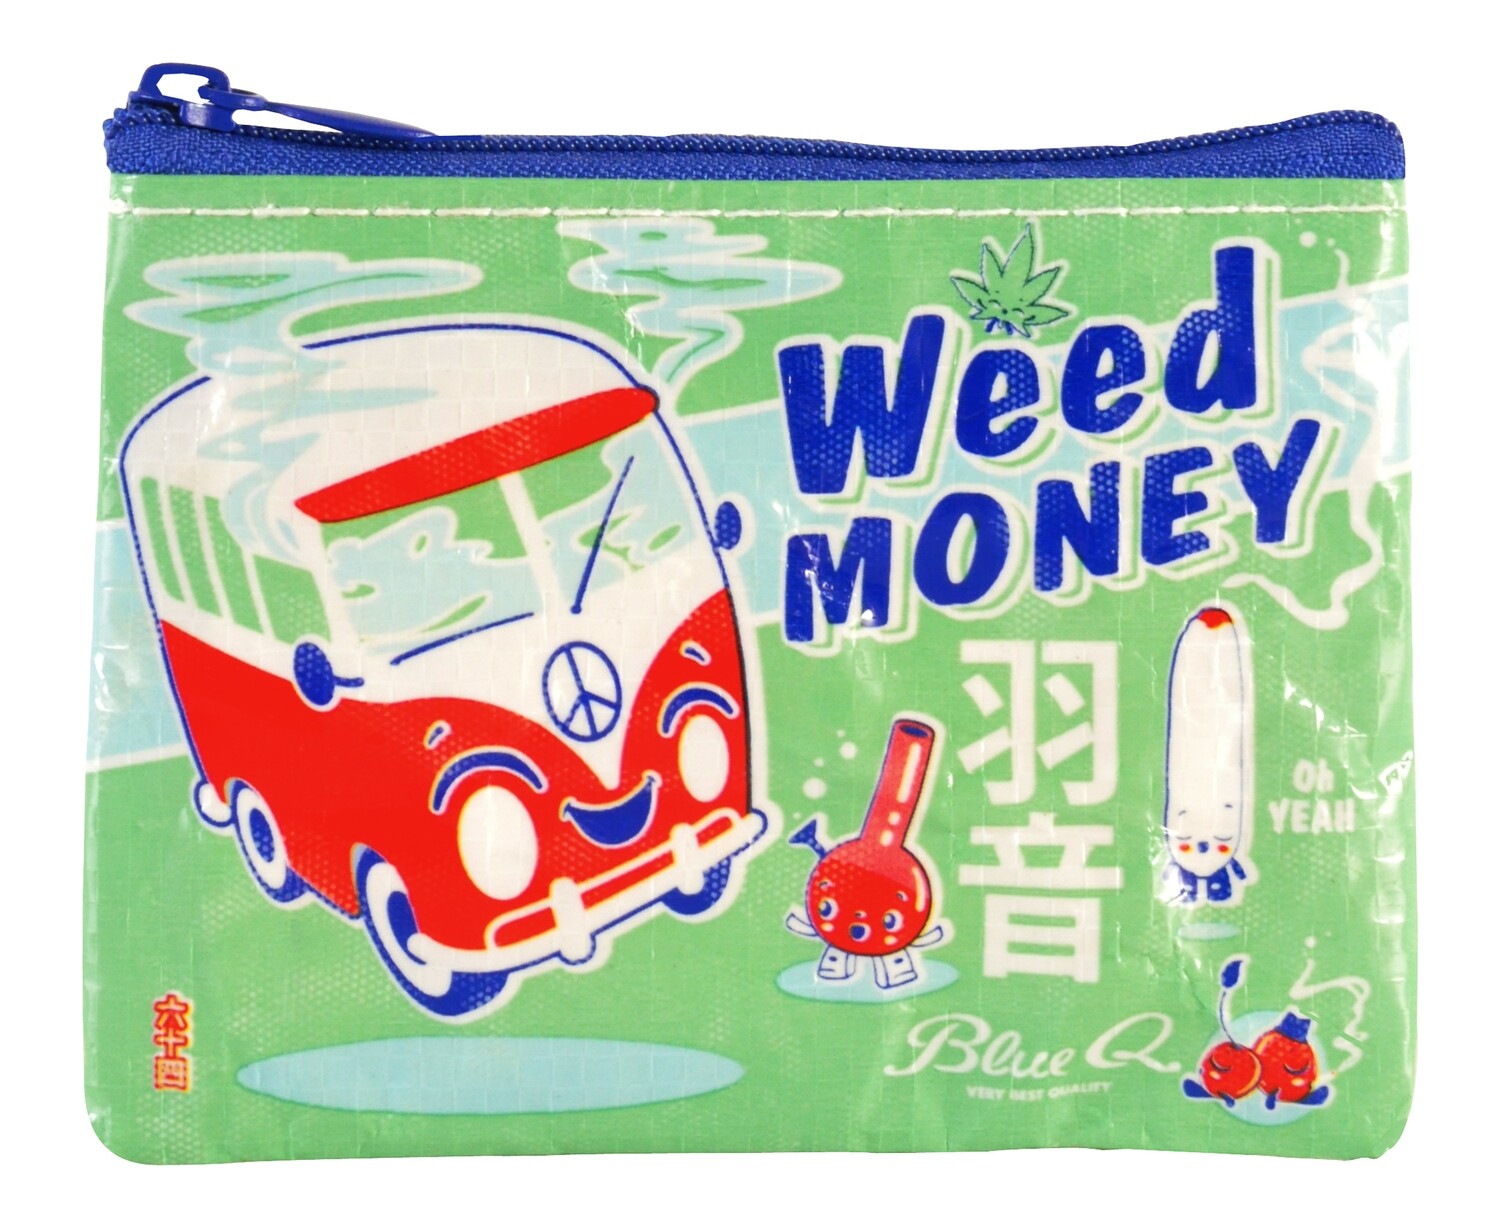 Weed Money coin purse